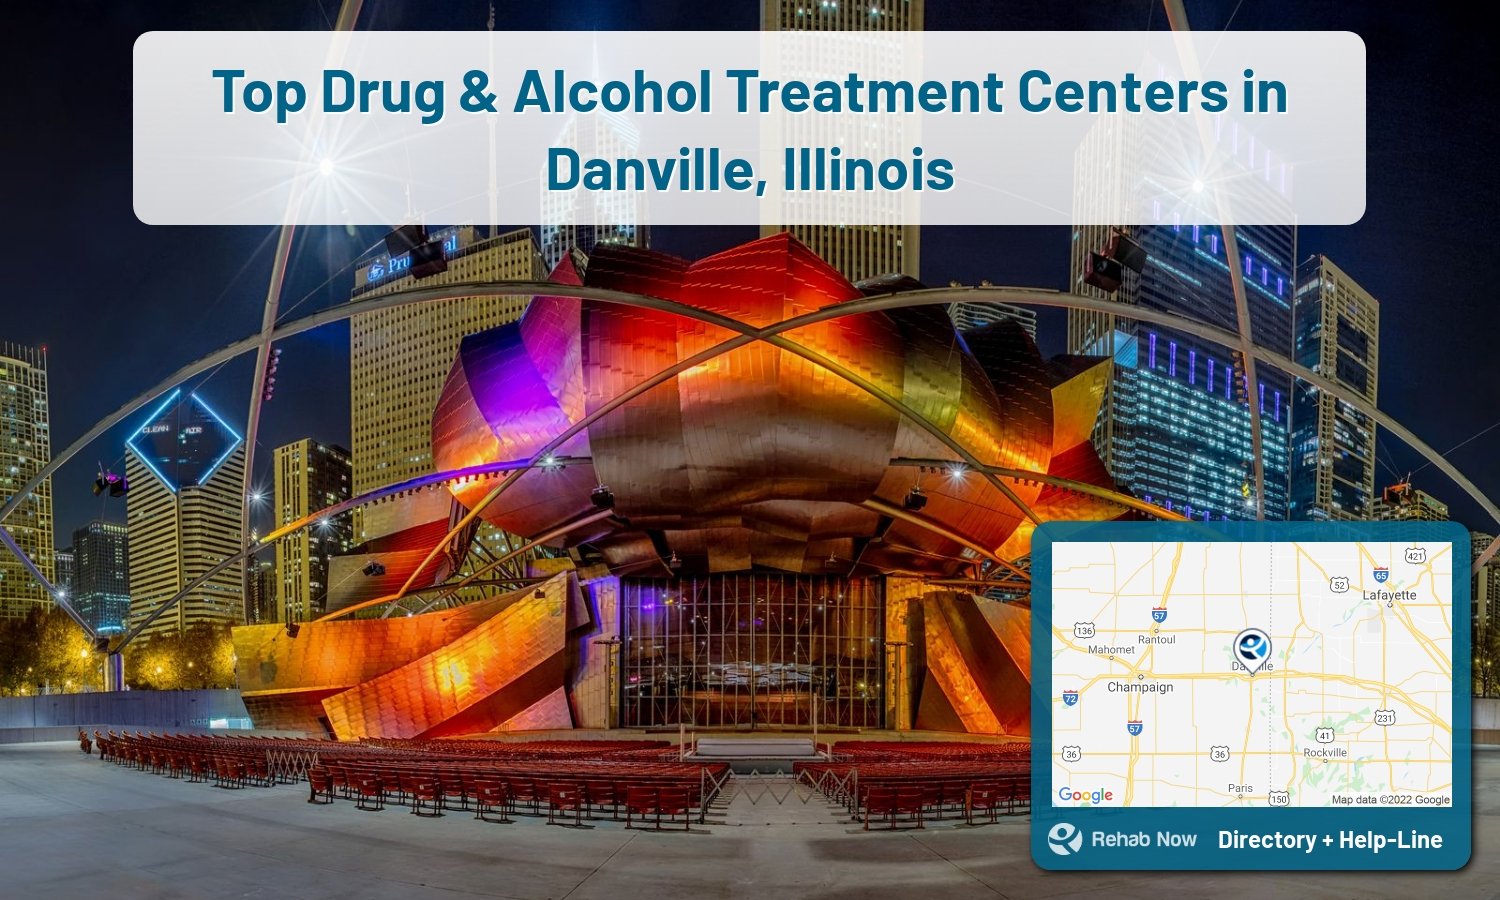 Need treatment nearby in Danville, Illinois? Choose a drug/alcohol rehab center from our list, or call our hotline now for free help.